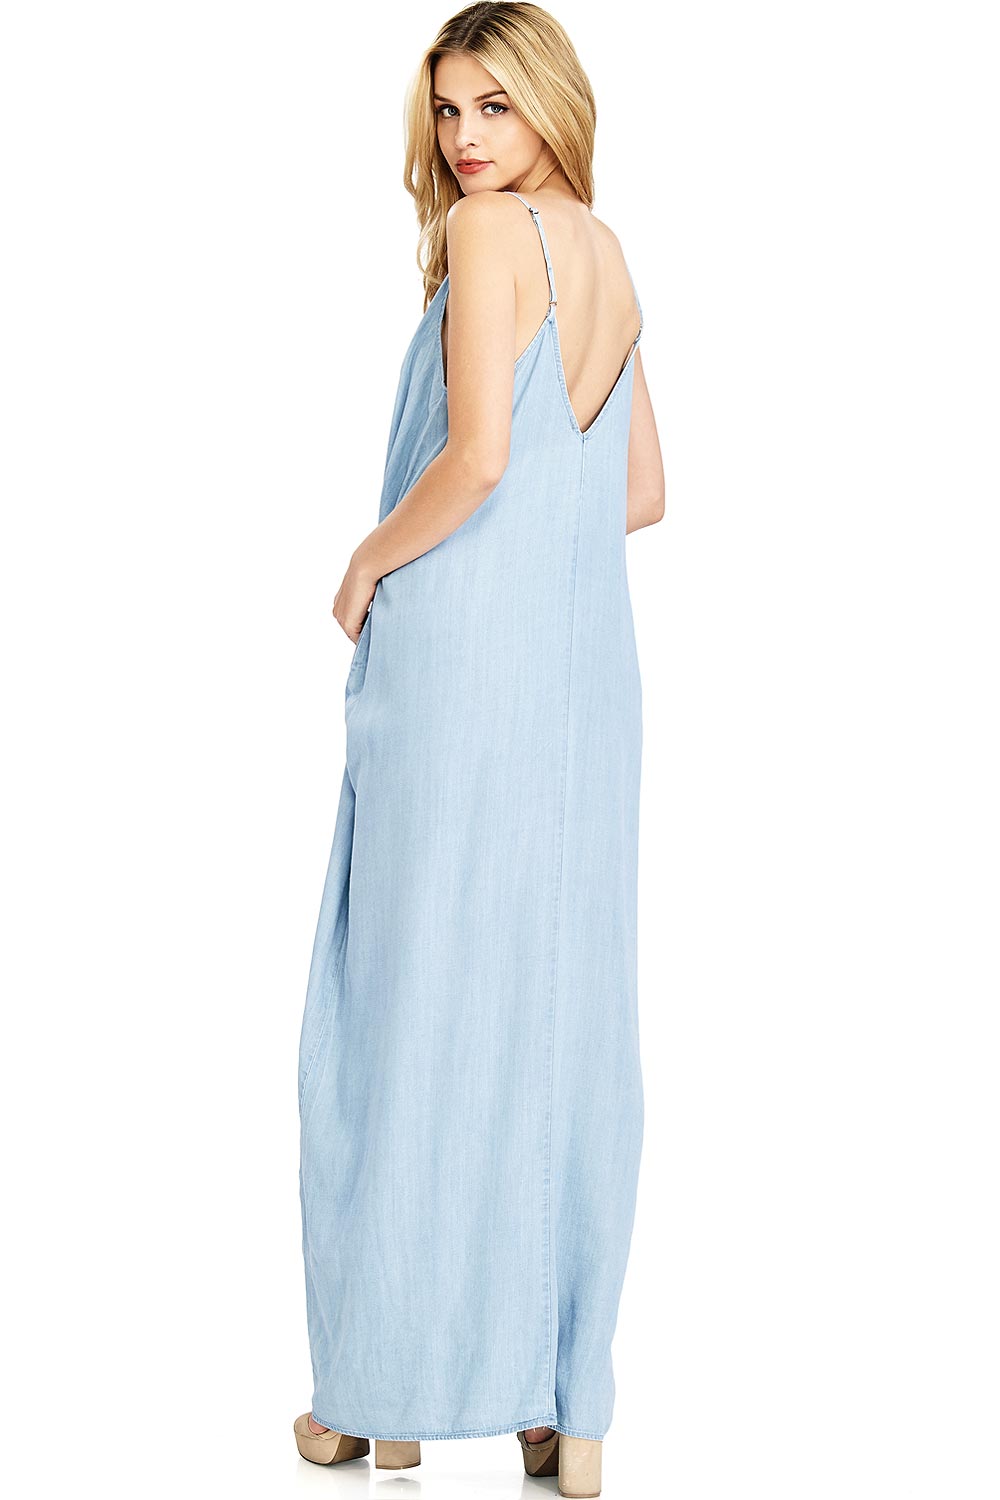 Spellbound Chambray Maxi Dress